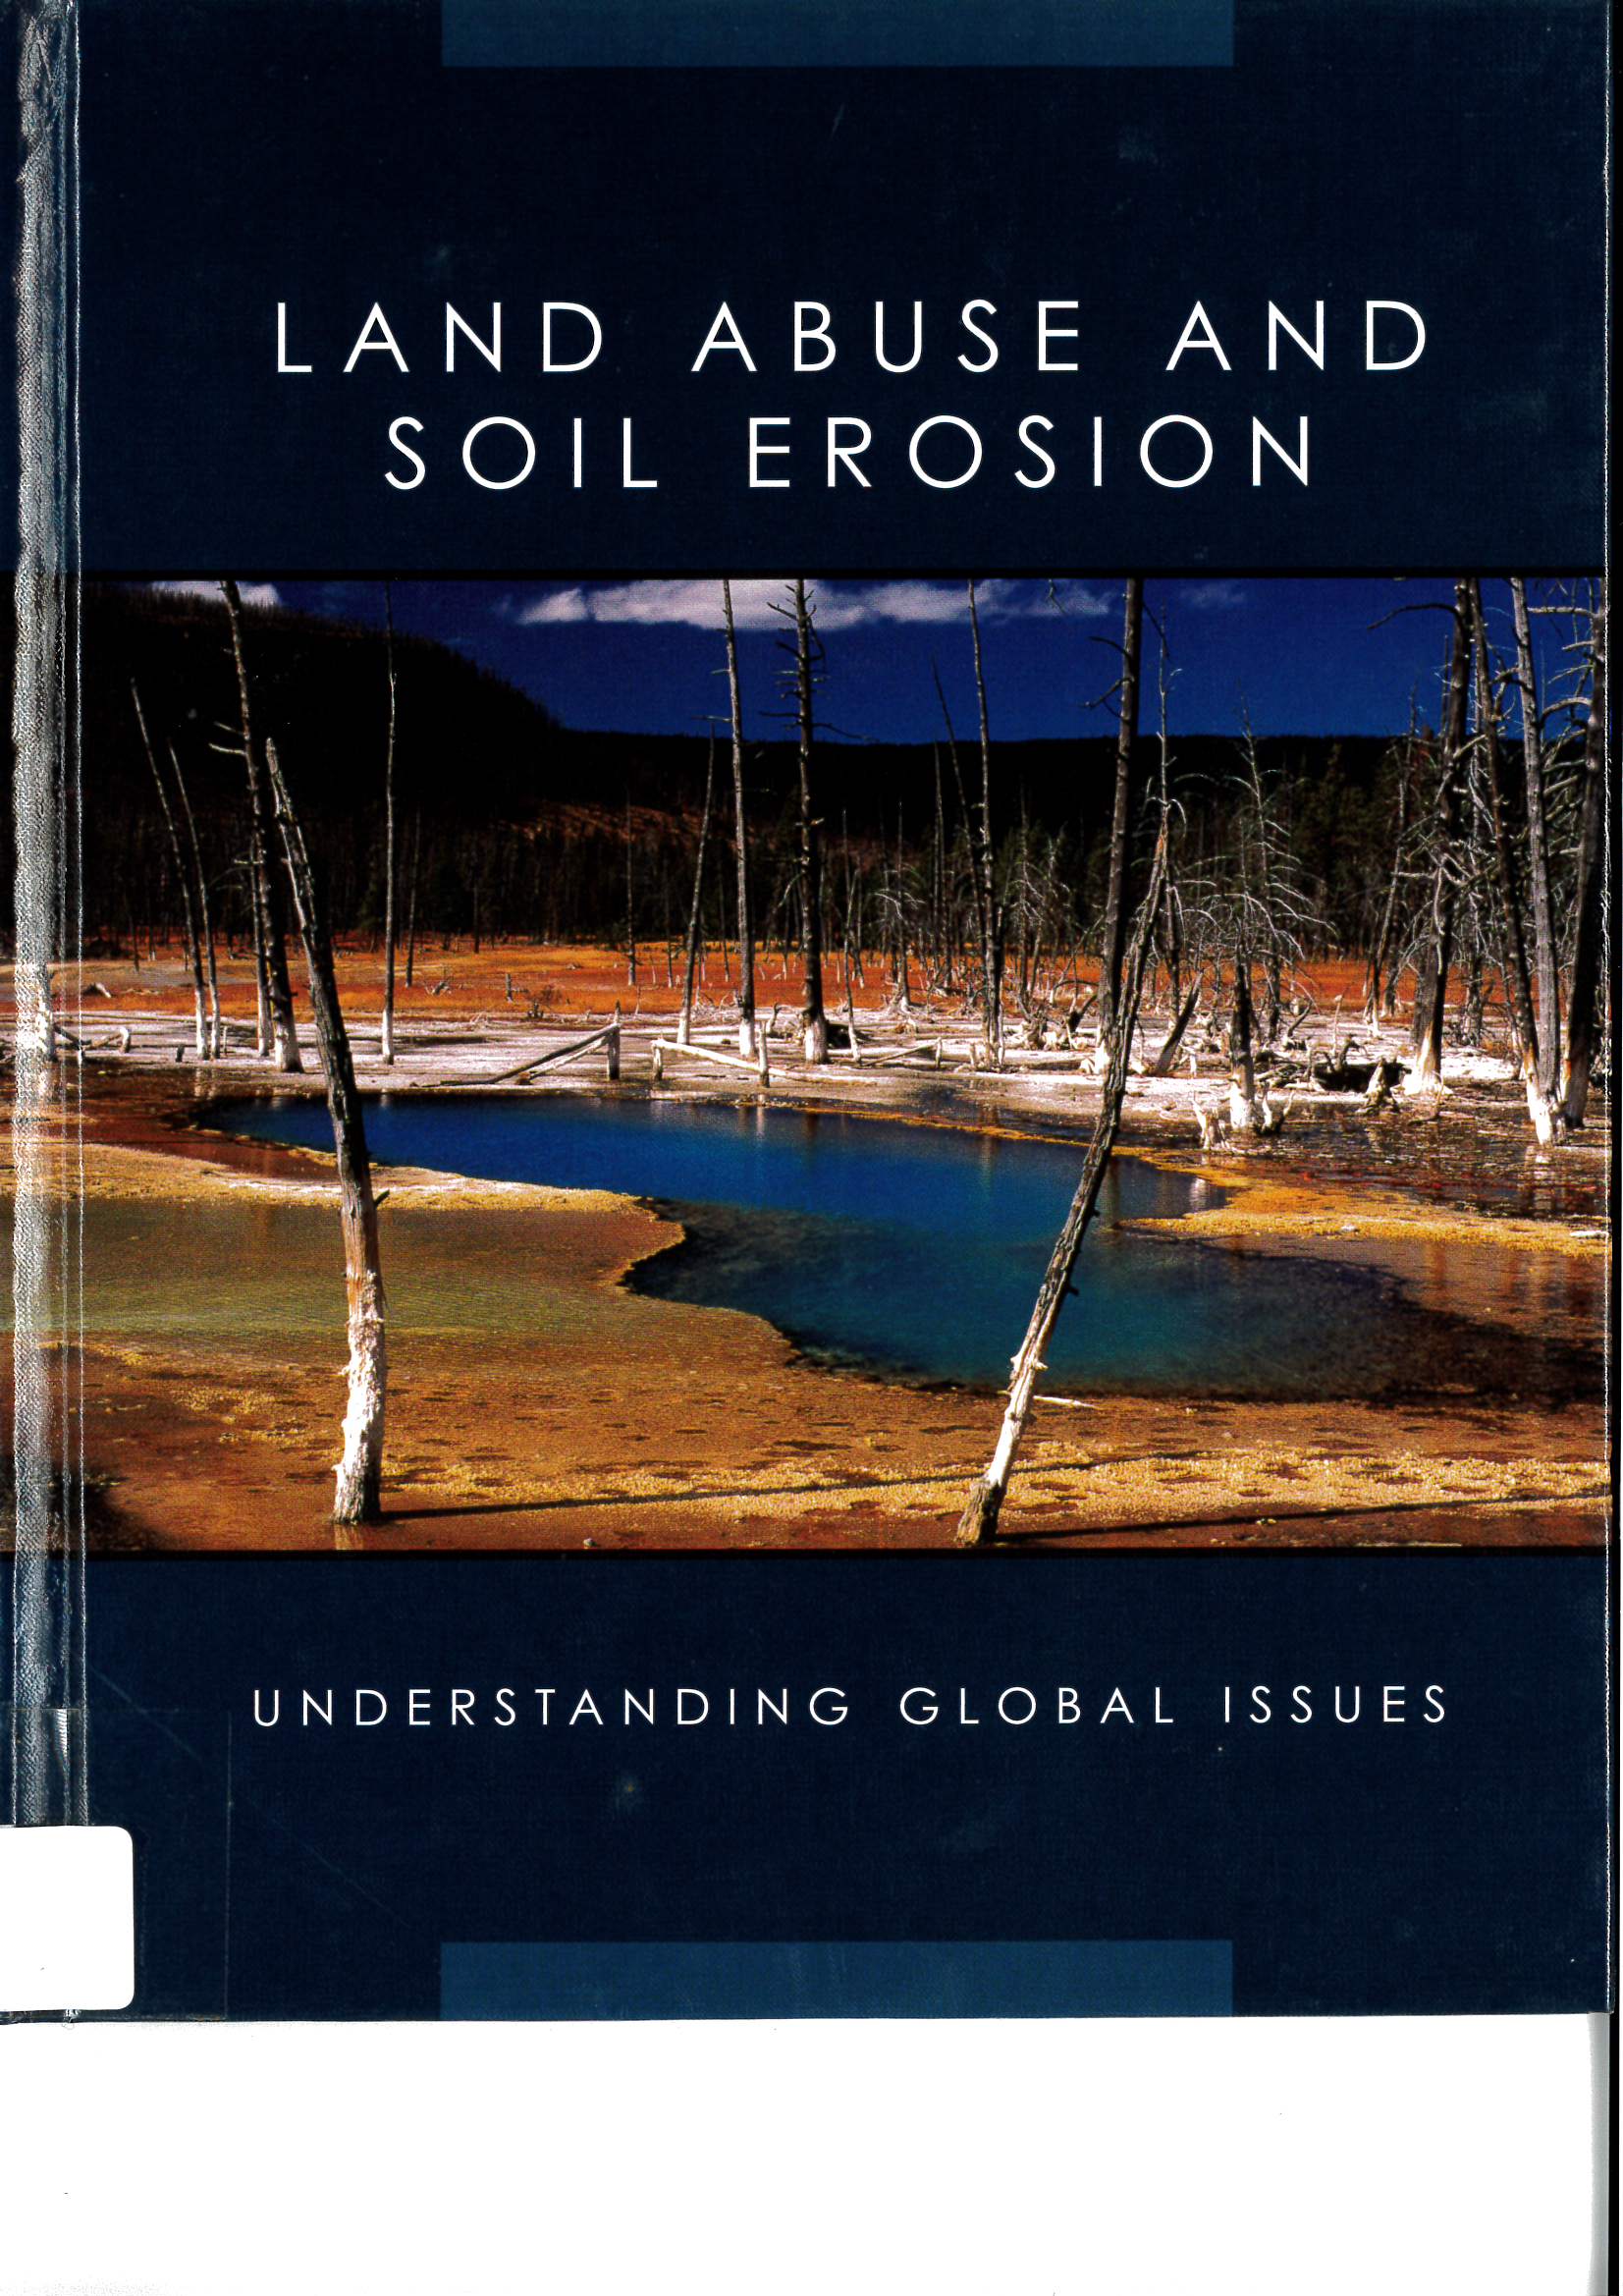 Land abuse and soil erosion